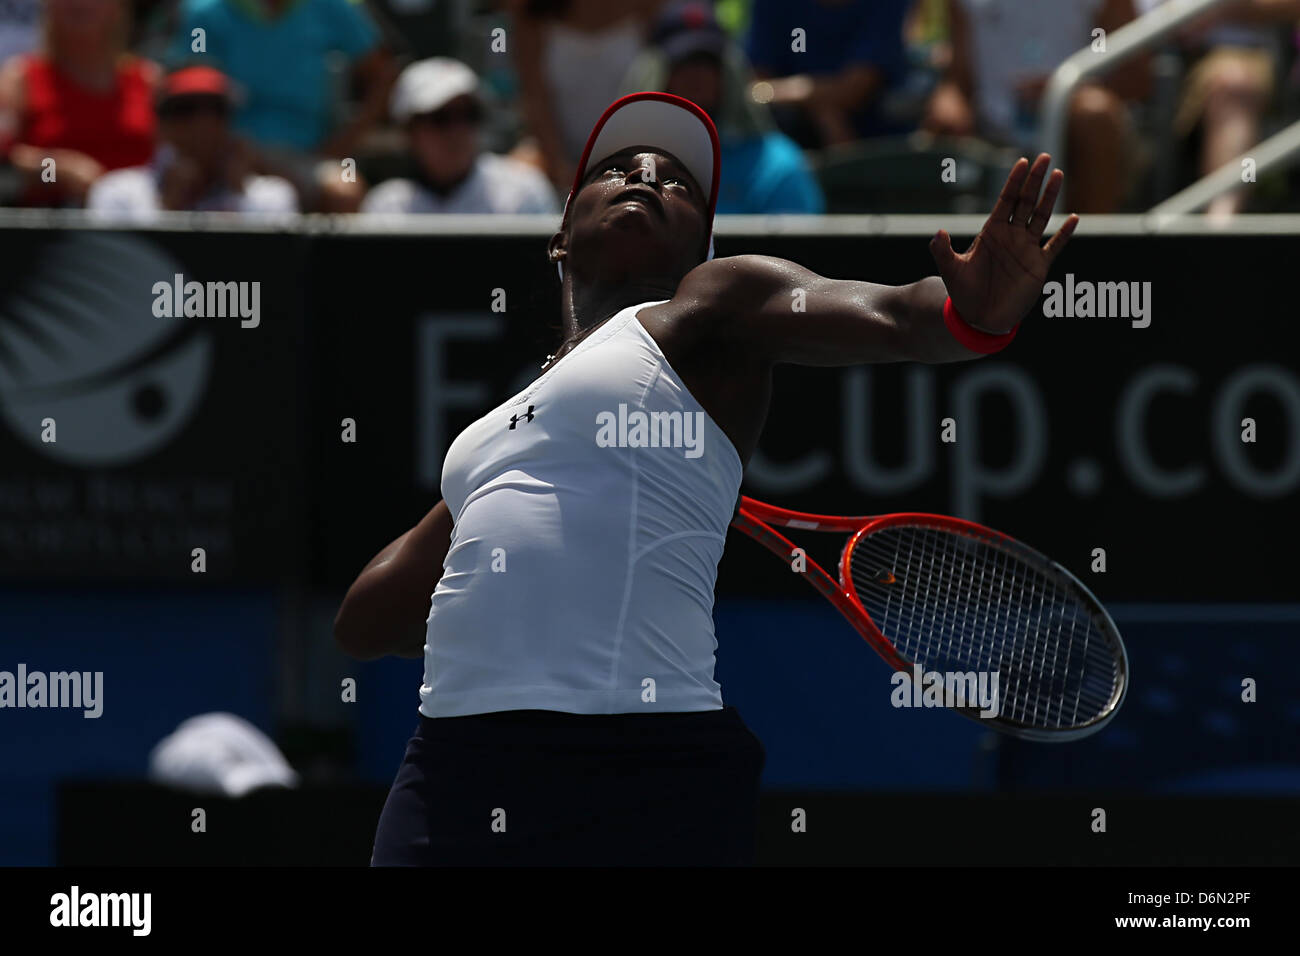 Sloane Stephens of USA in action during Fed Cup against Sweden in Delray Beach Tennis Center at Delray Beach, Florida. Stock Photo